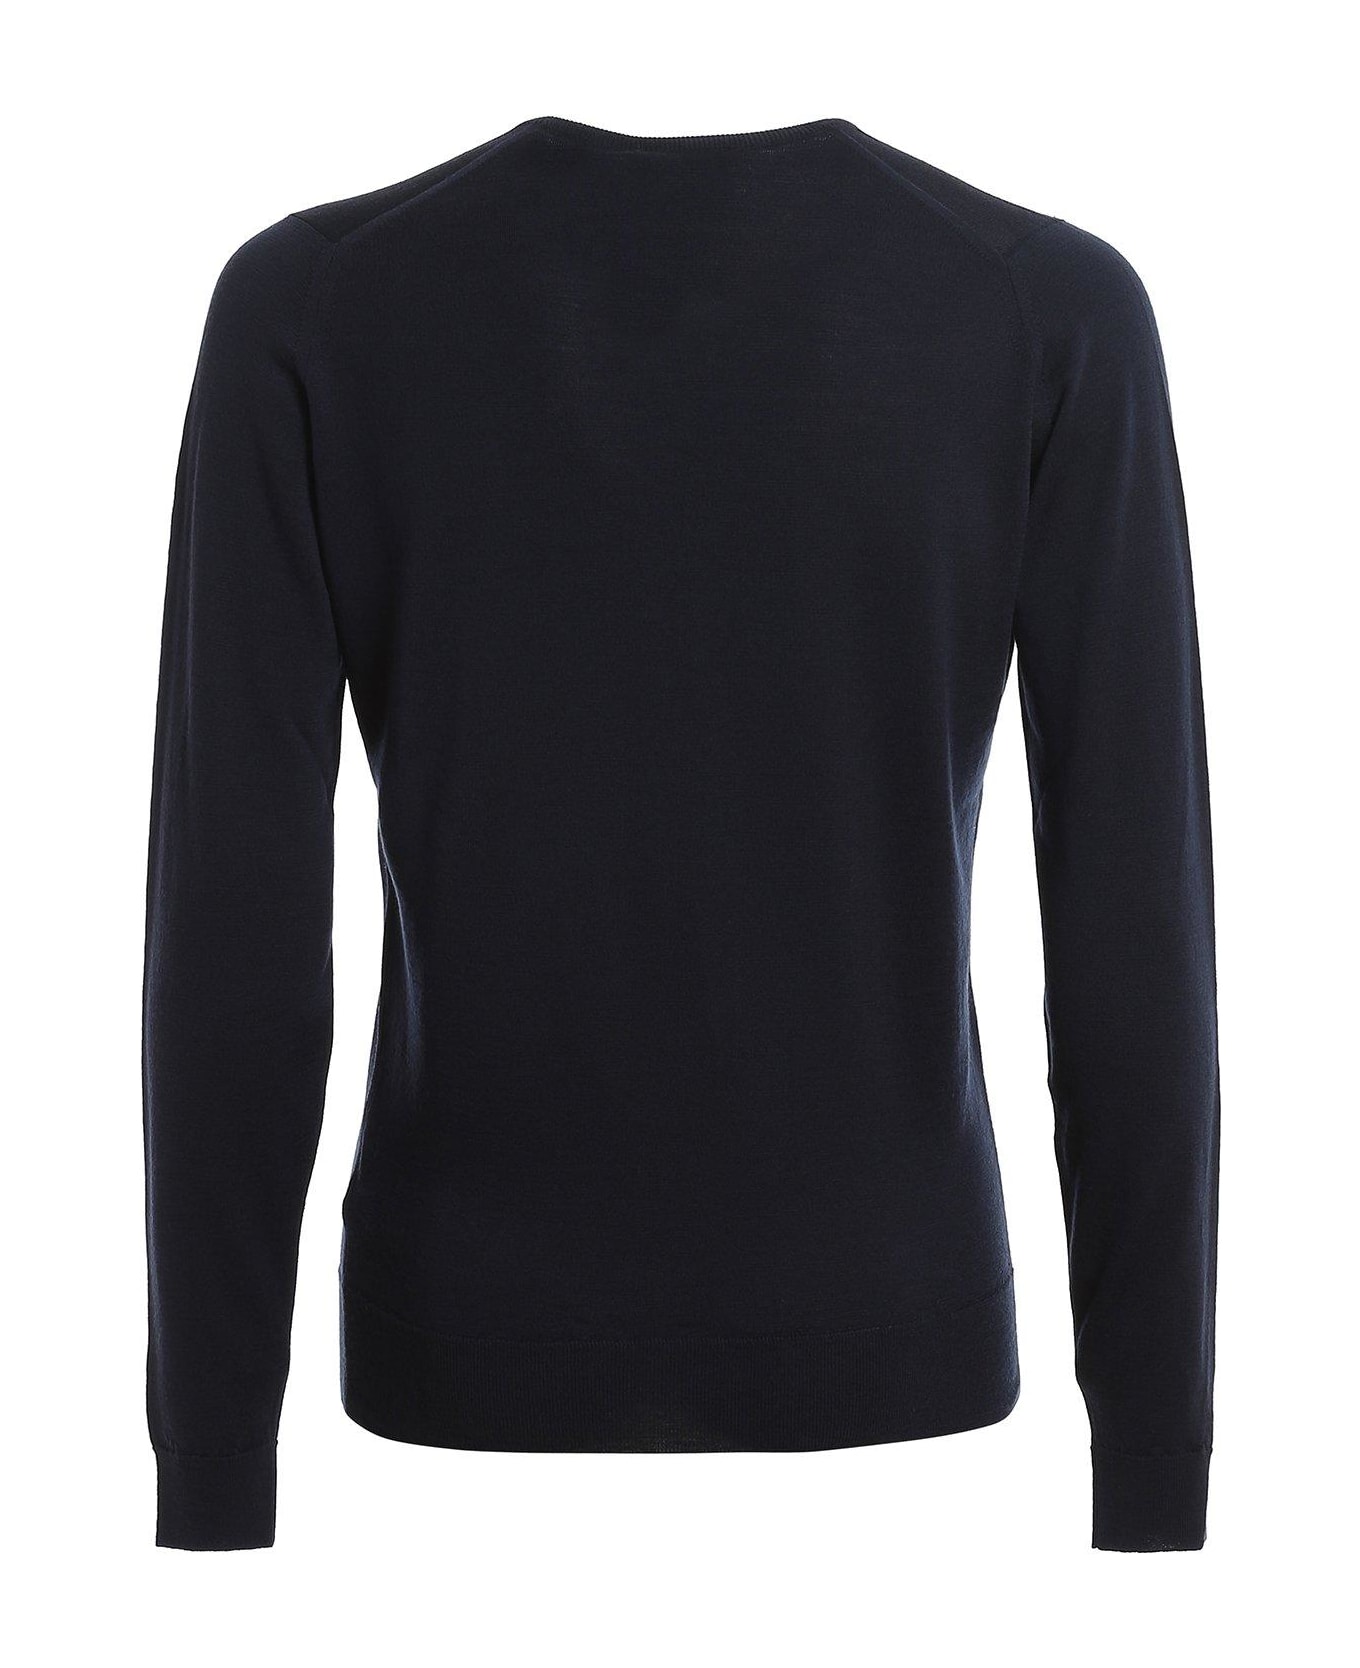 John Smedley Lundy Knitted Jumper - NAVY